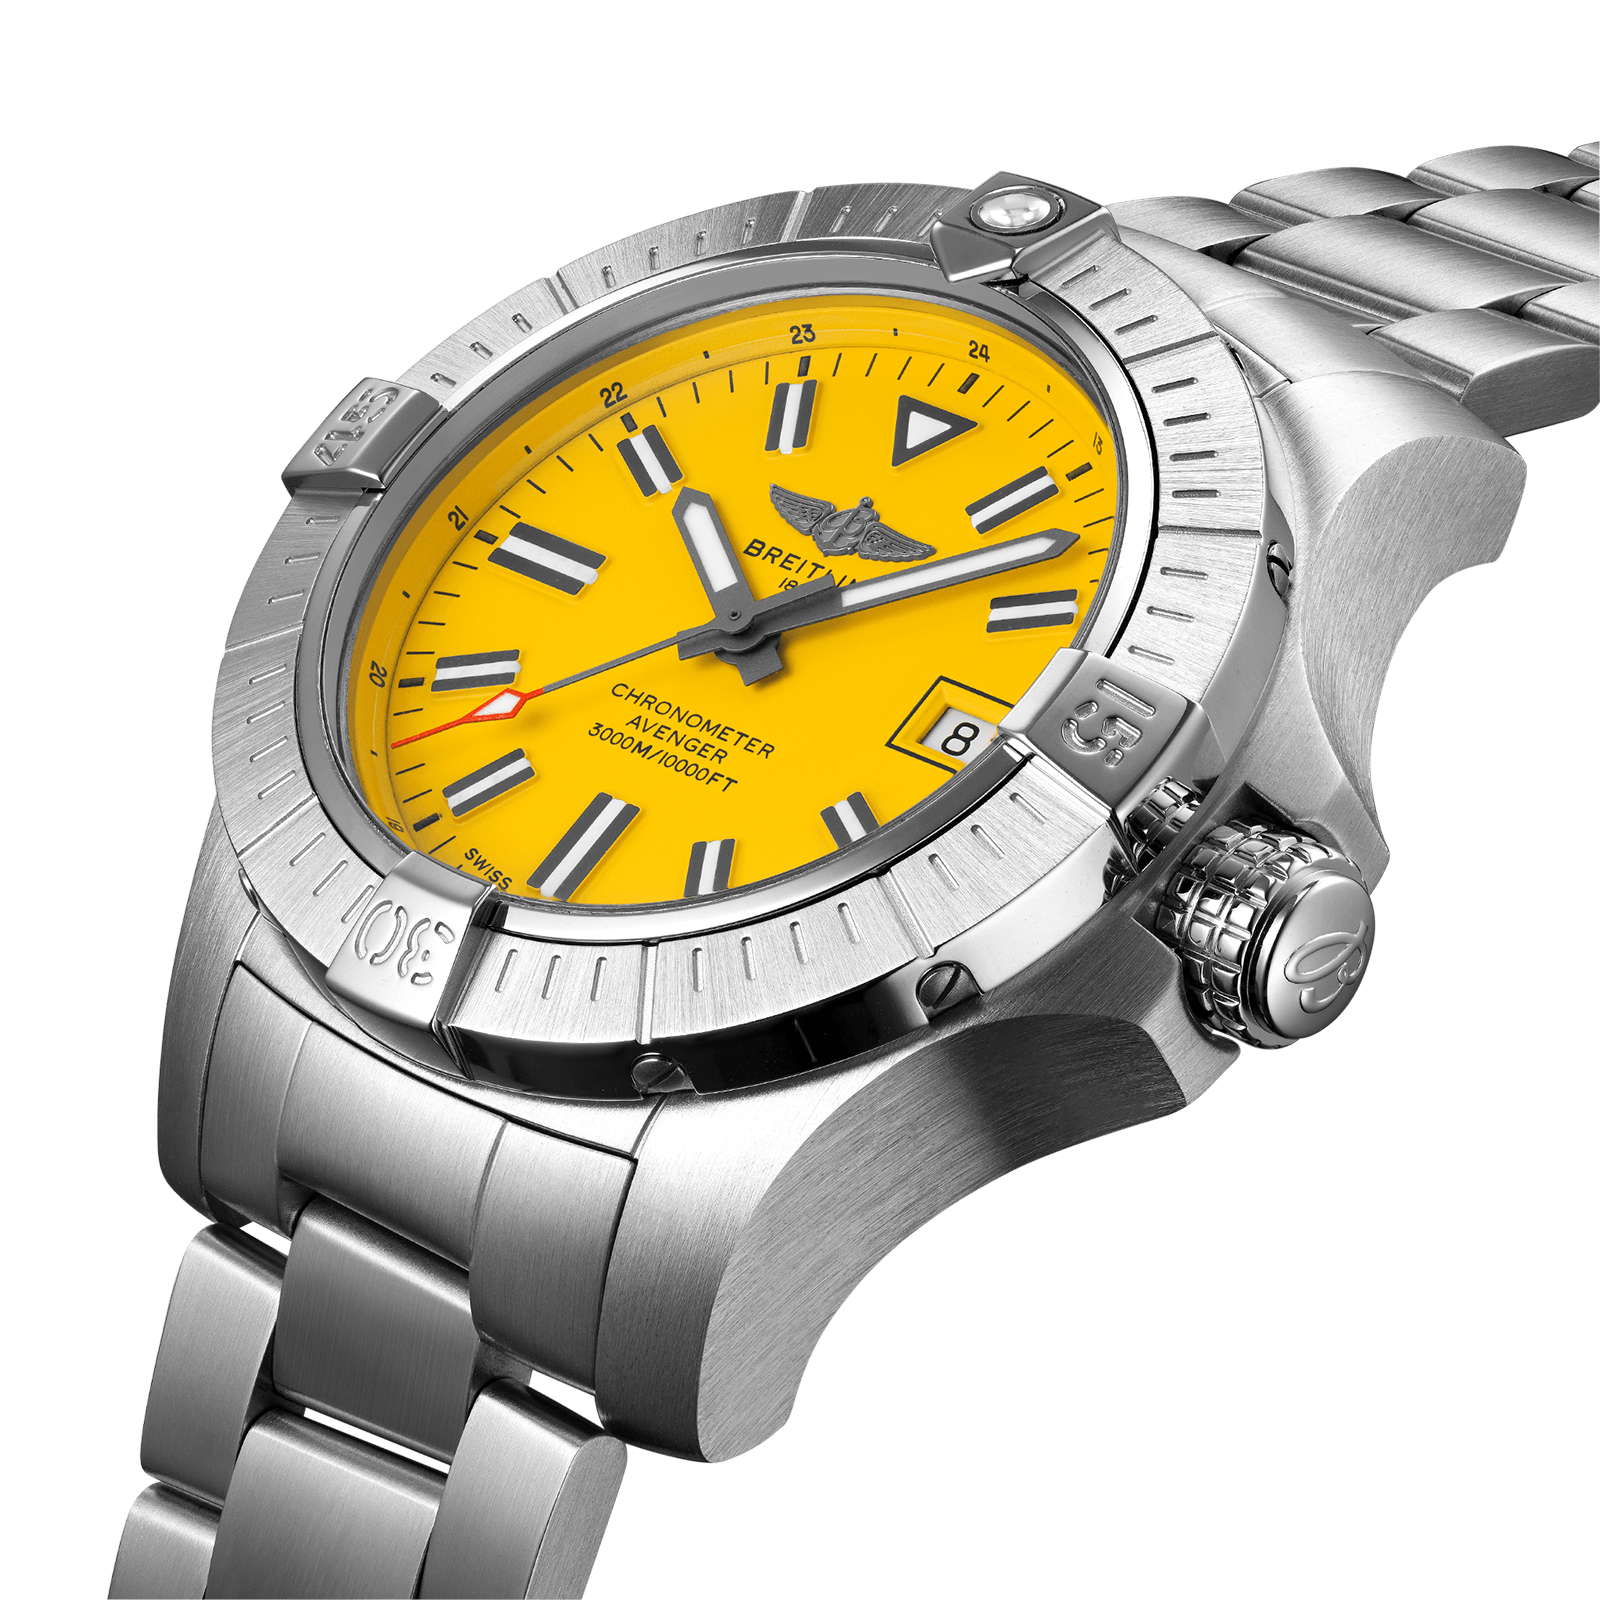 The male replica watch has yellow dial.